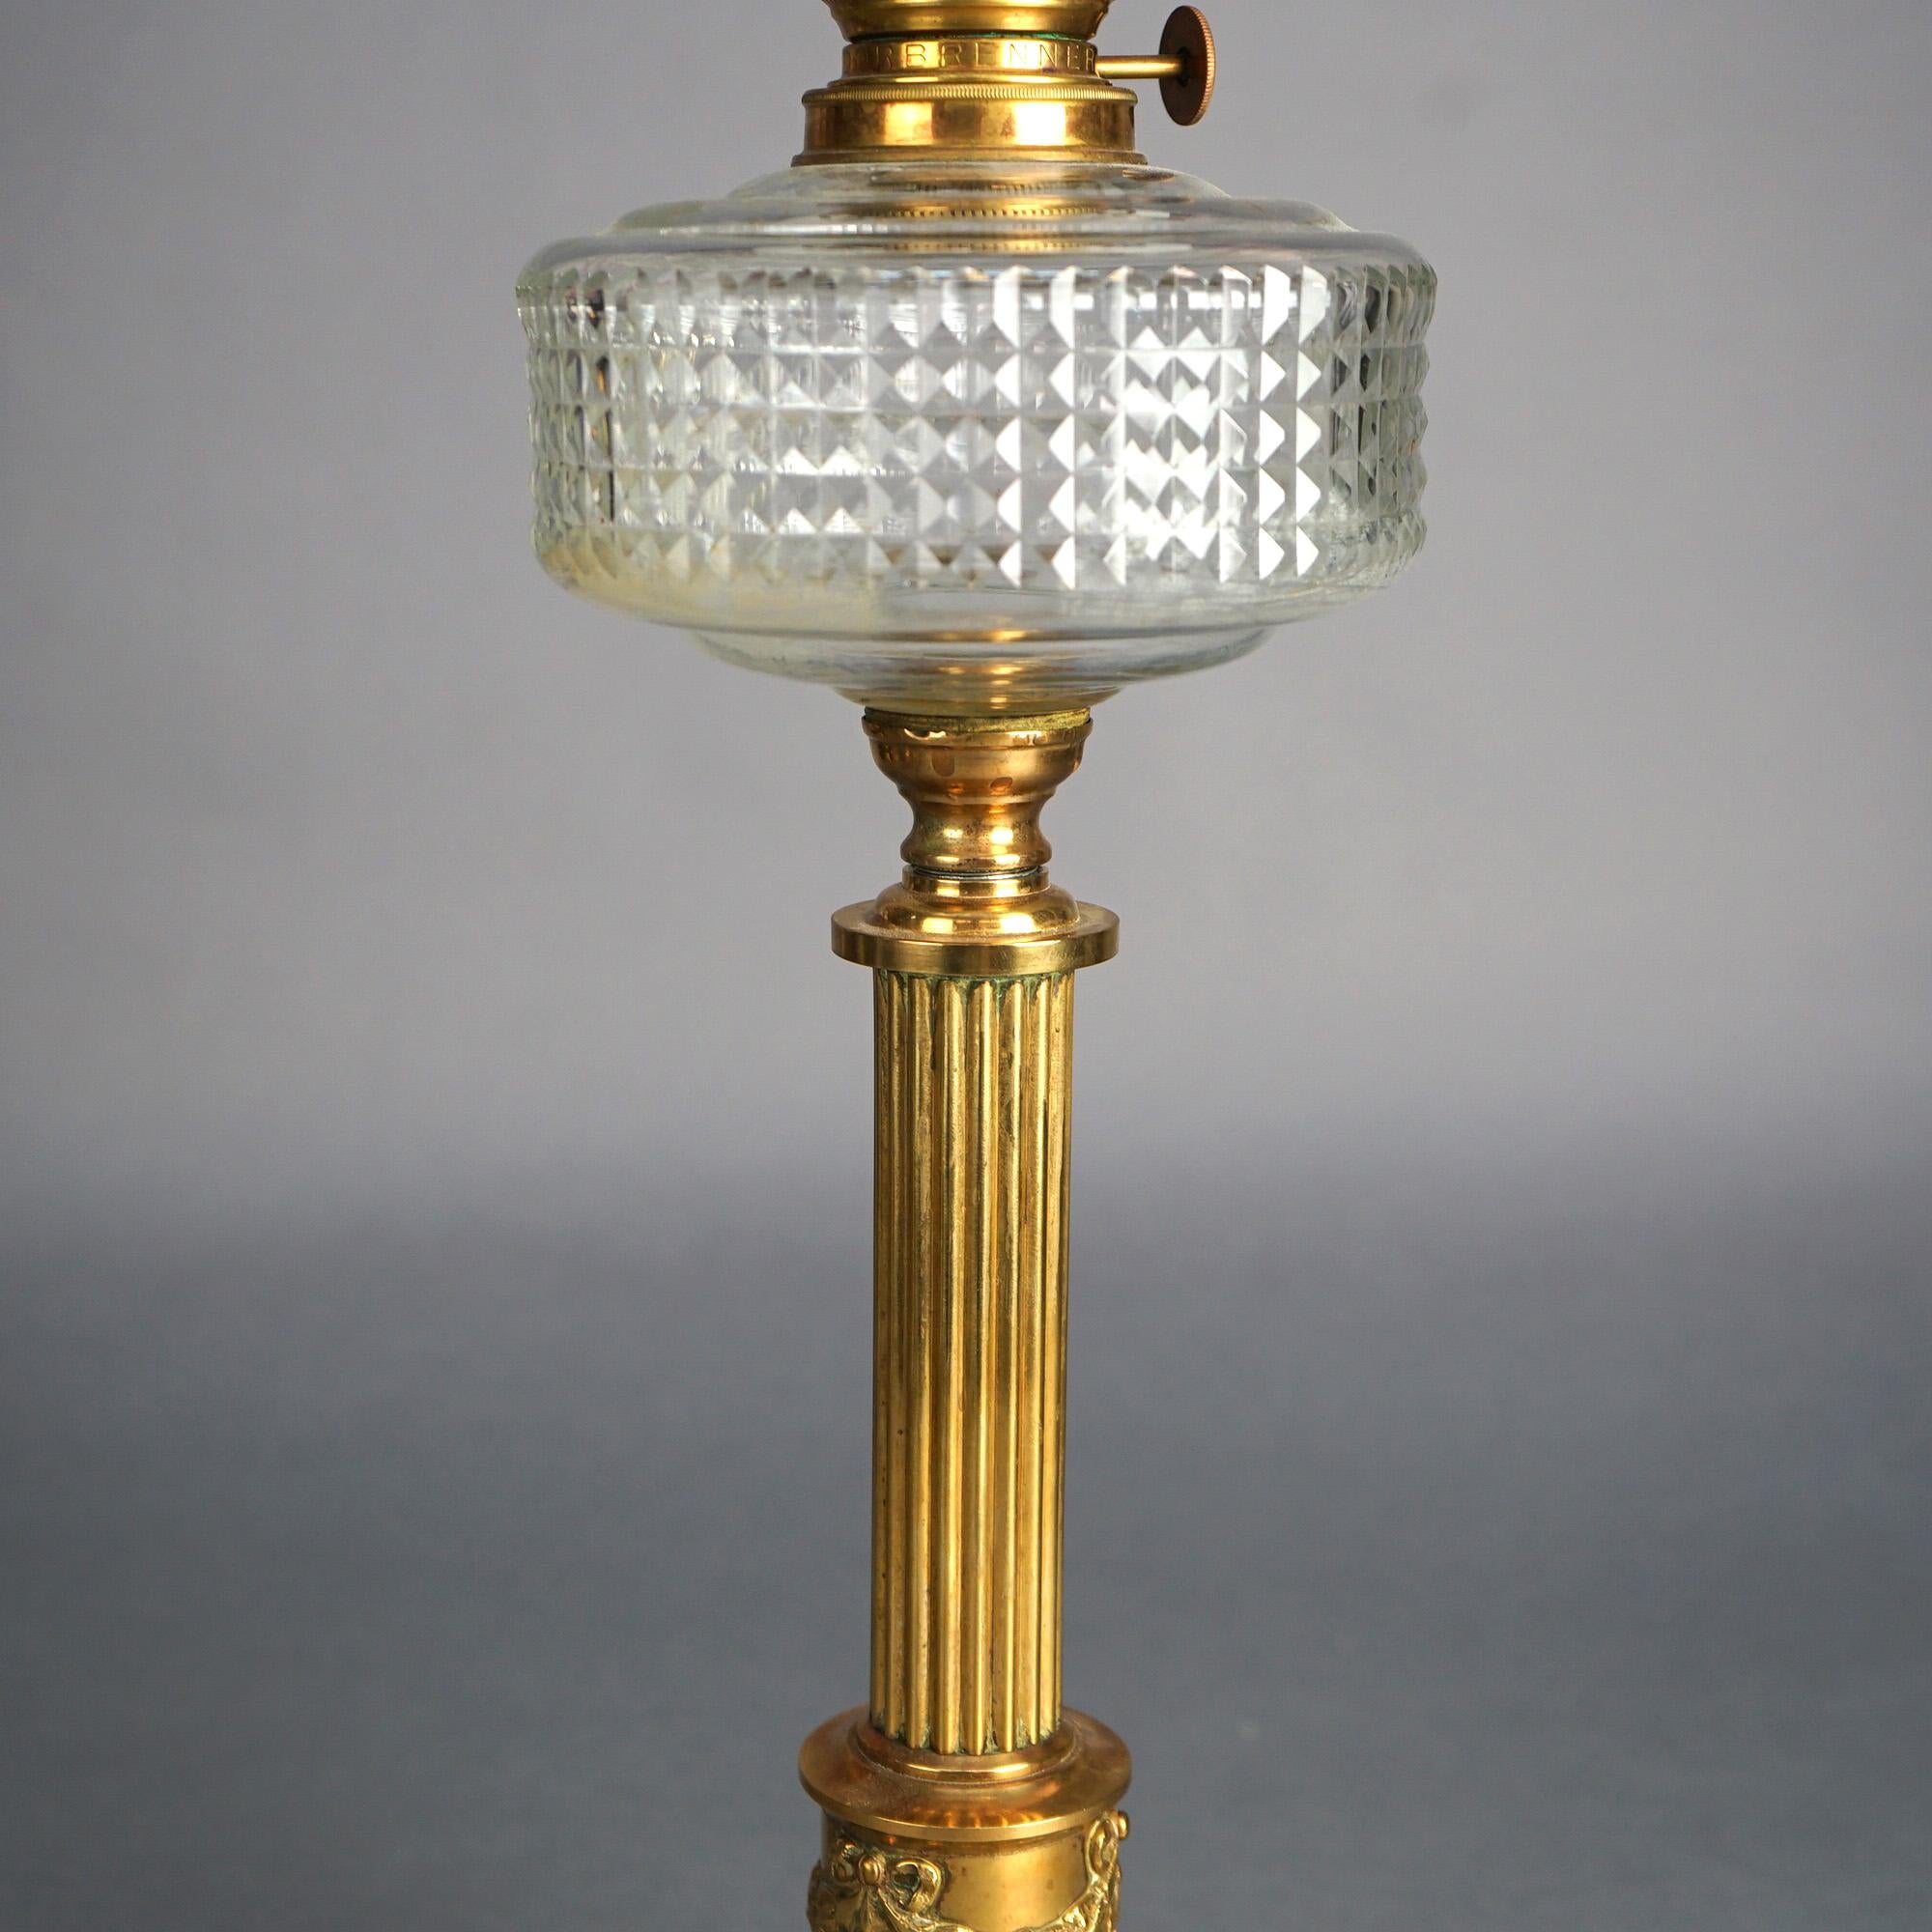 Antique Neoclassical Bronze Oil Lamp with Floral Ripple Glass Shade C1890 For Sale 4